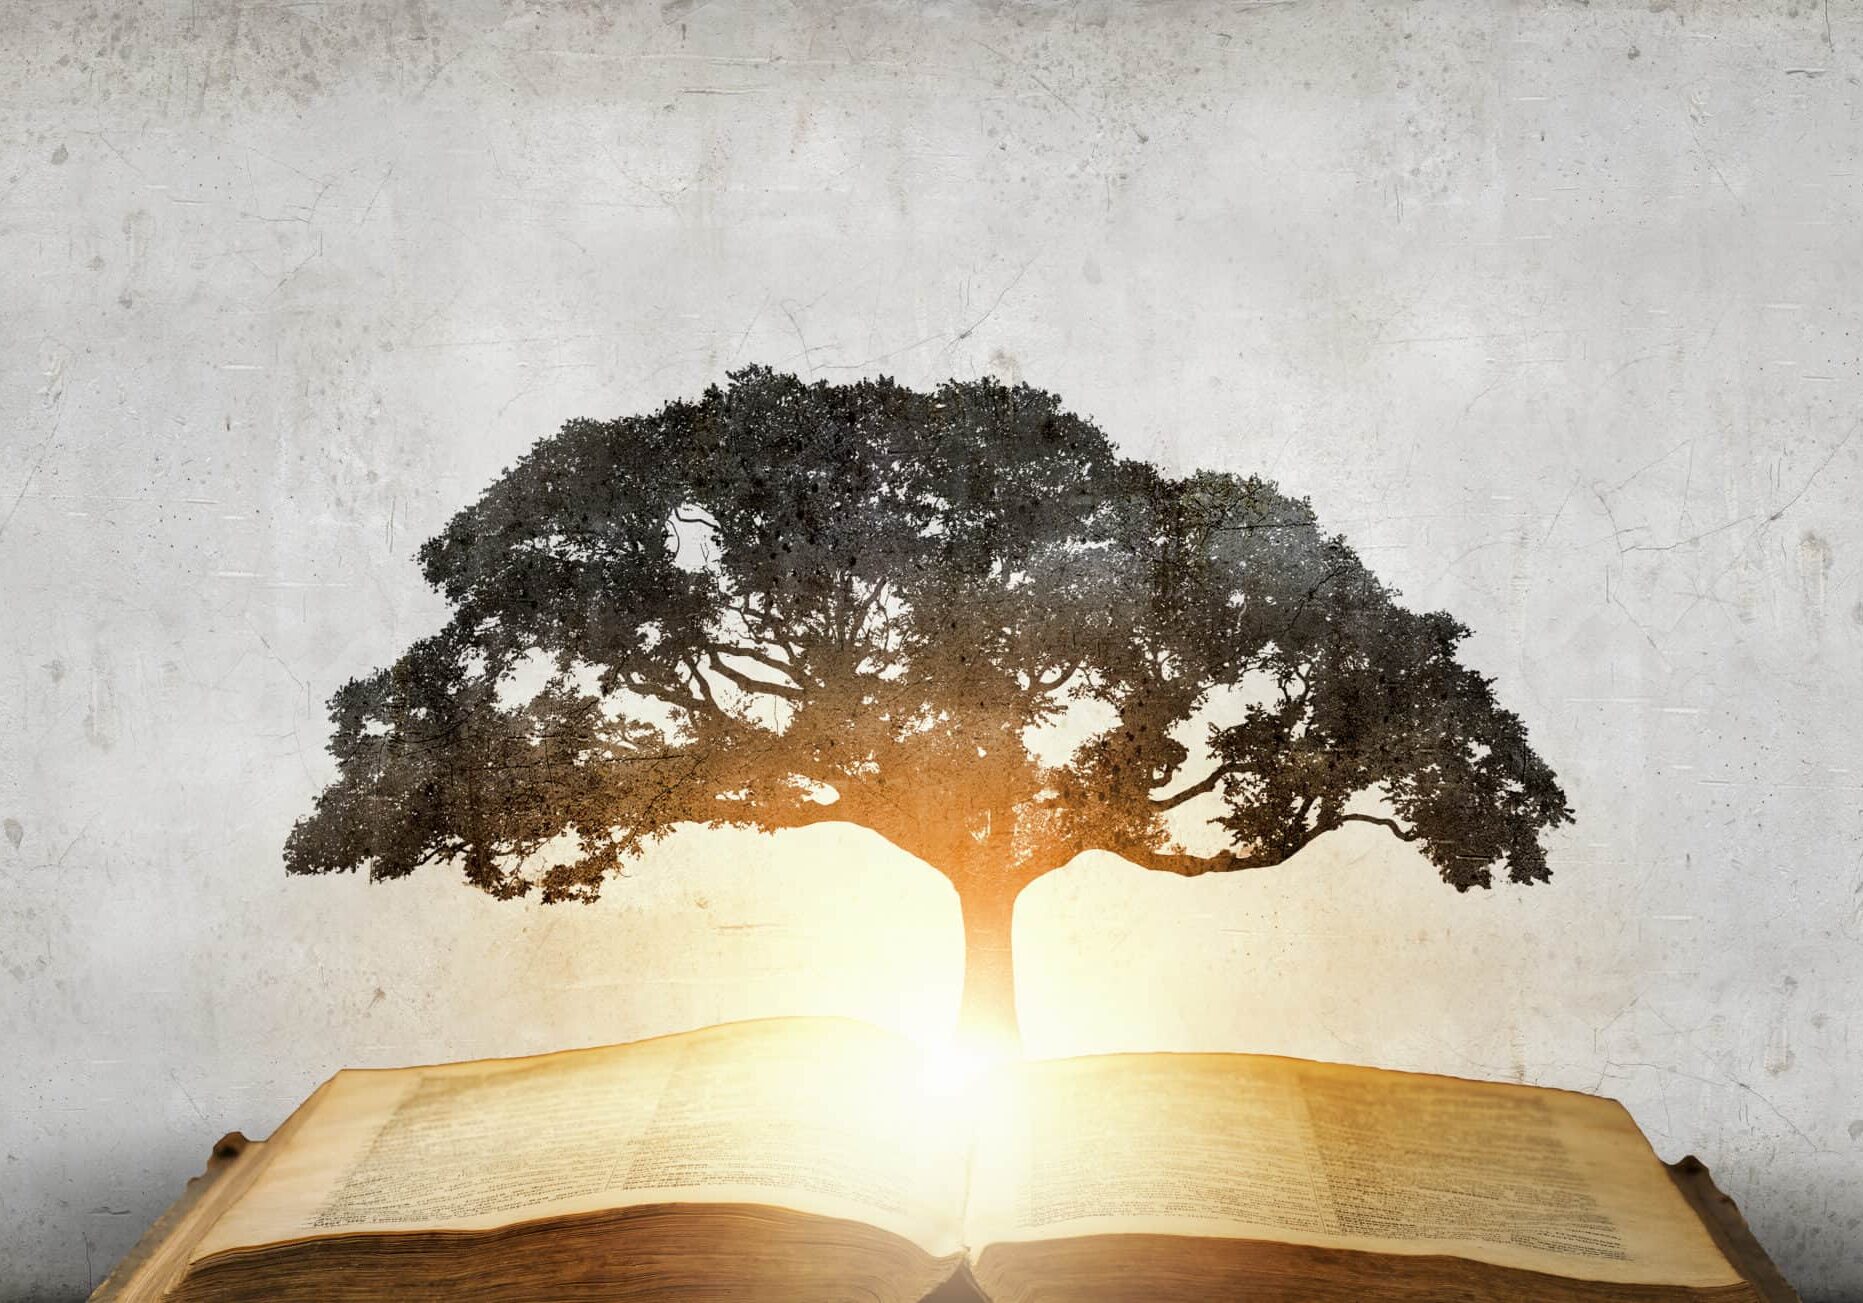 Concept of education and knowledge with tree growing from book